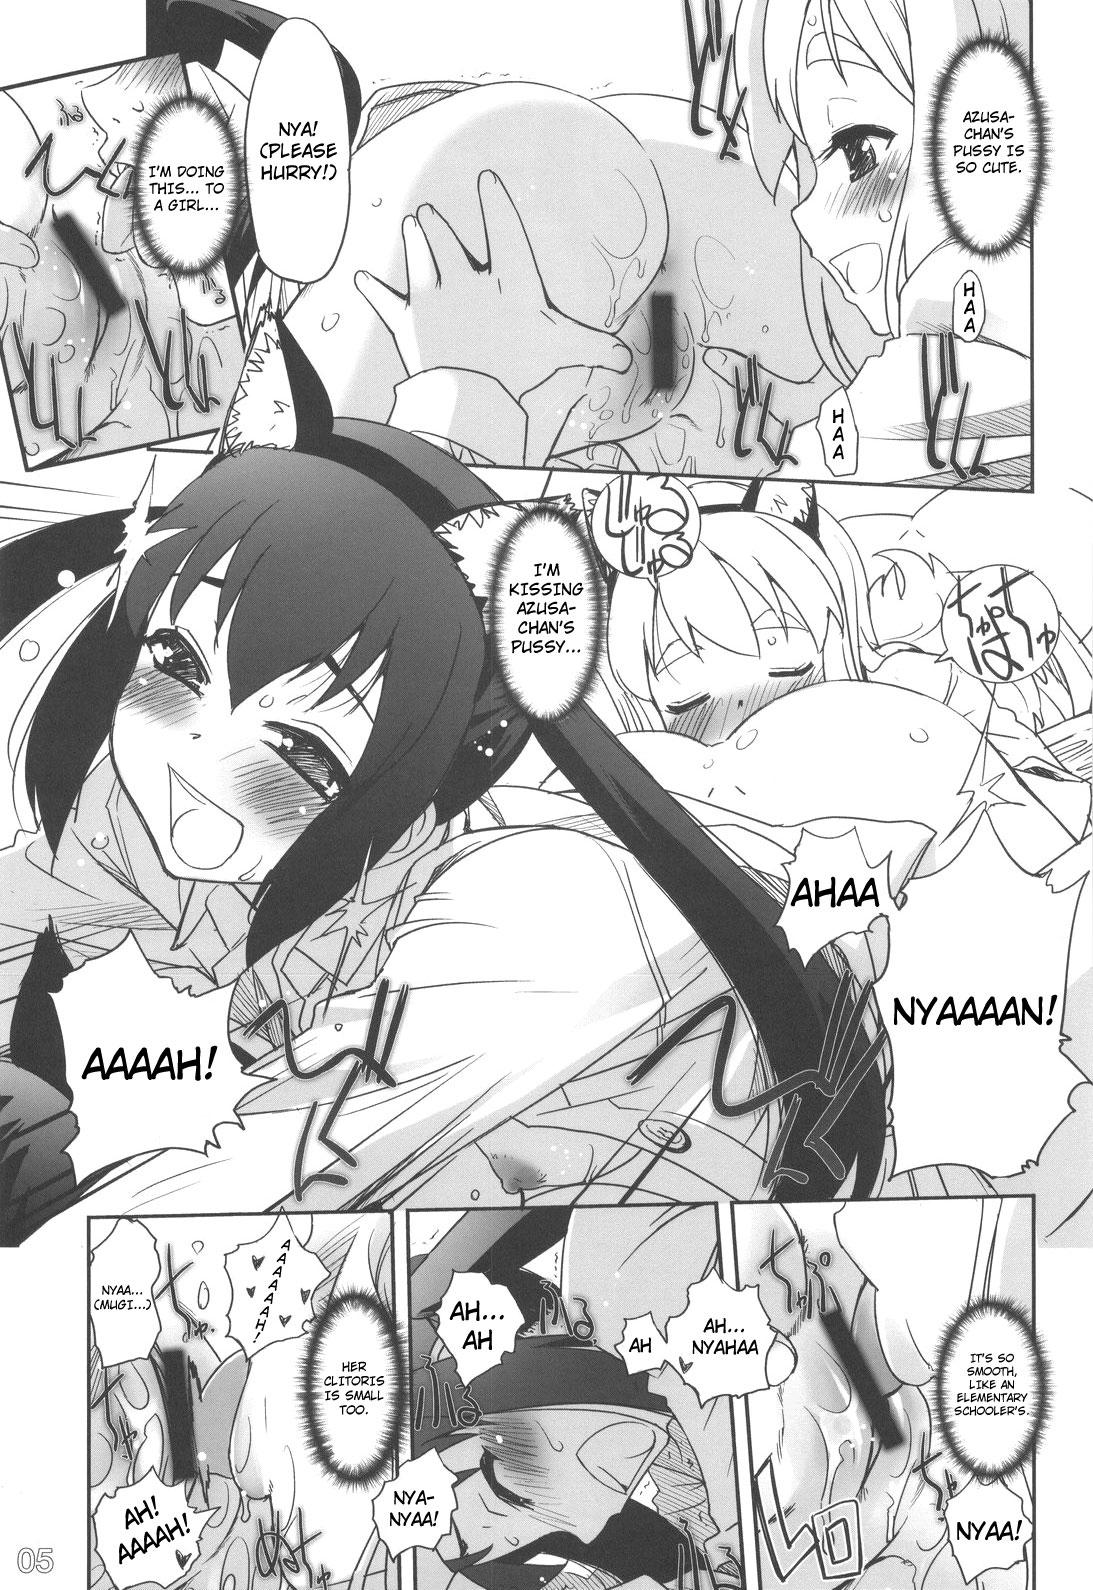 Married Nekomimi to Toilet to Houkago no Bushitsu | Cat Ears And A Restroom And The Club Room After School - K on Fat Ass - Page 4